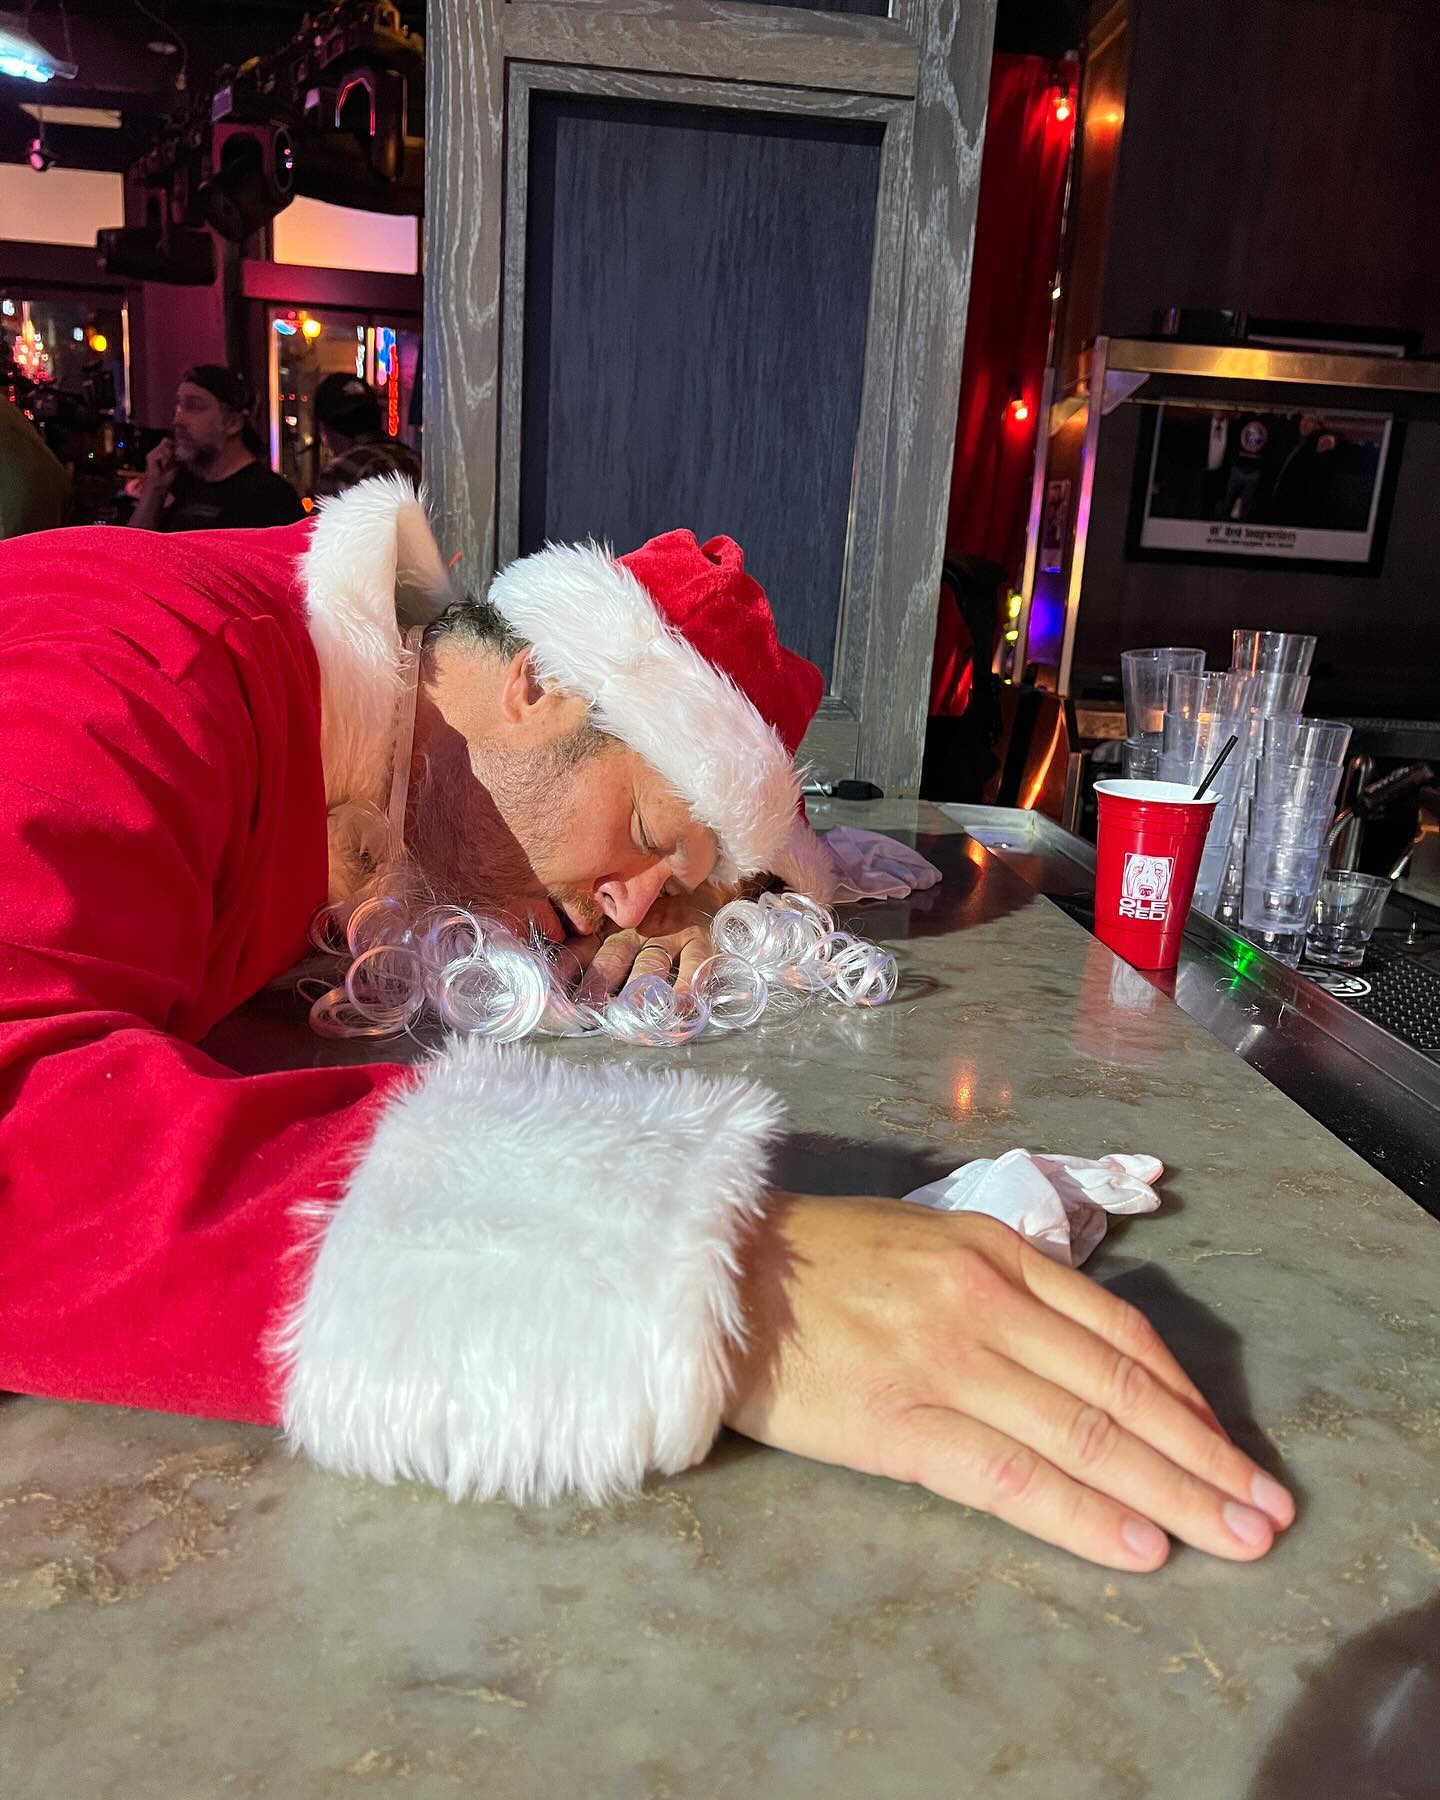 Blake posted himself alone in a bar over Christmas